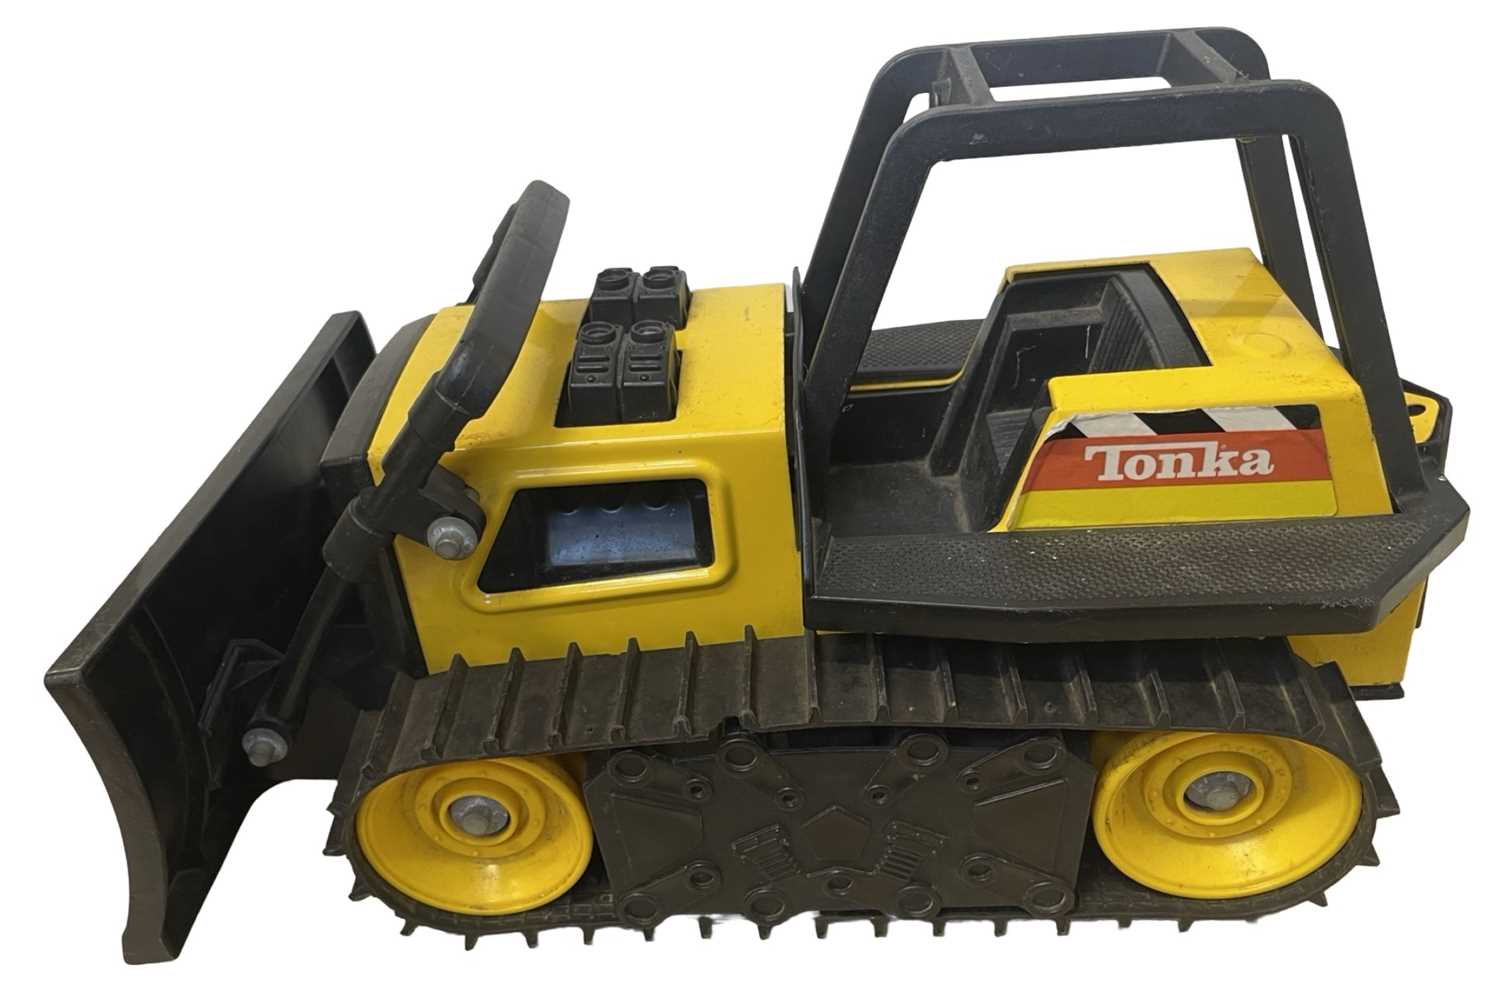 A pressed steel and plastic Tonka bulldozer, with rubberised track